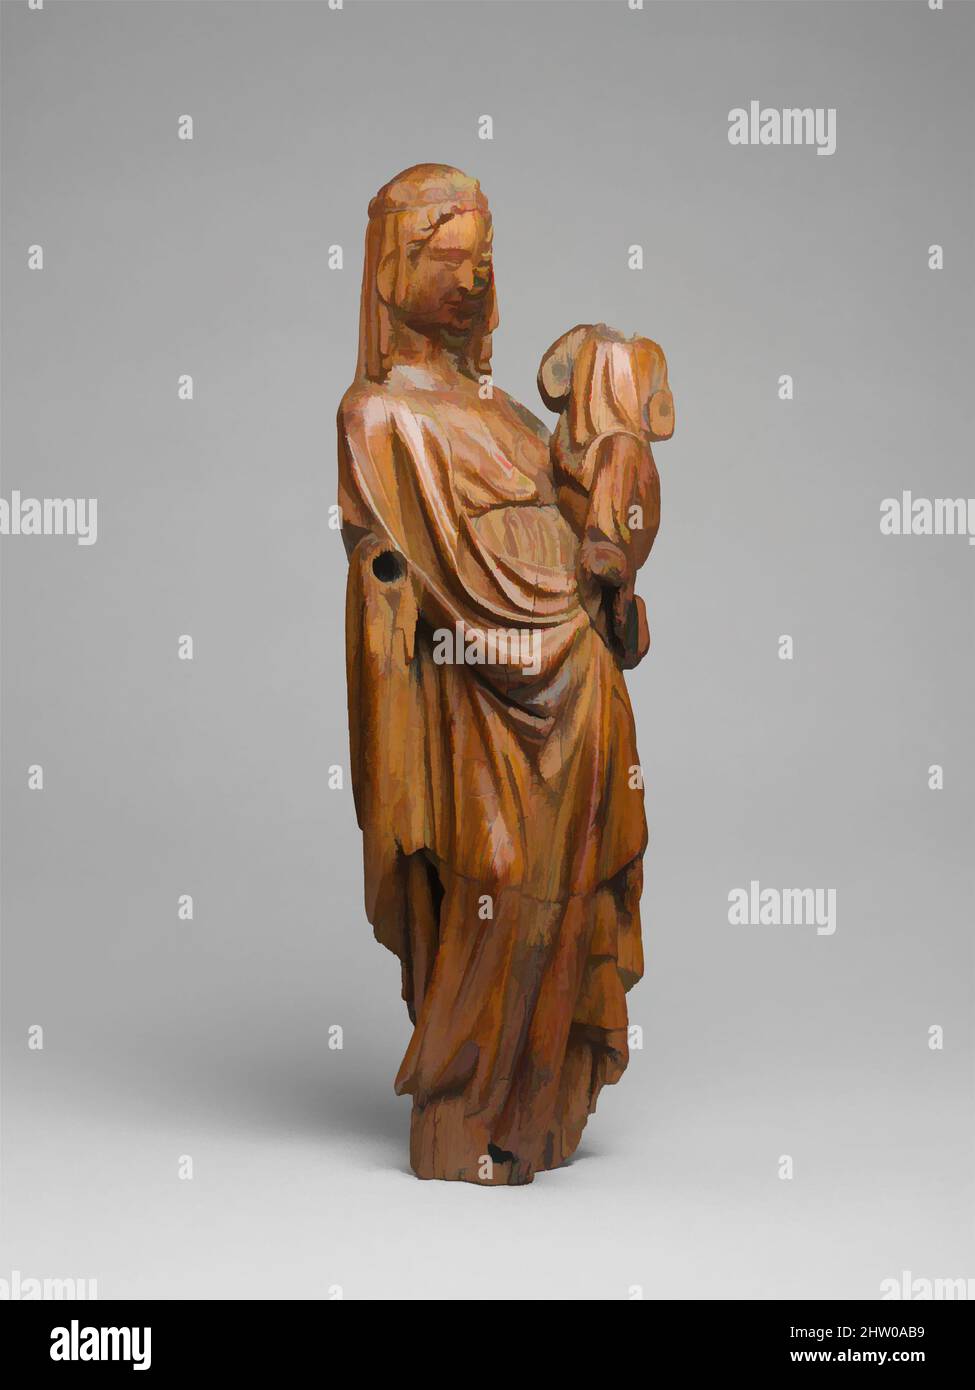 Art inspired by Virgin and Child, ca. 1300, North French, Boxwood, Overall: 14 5/16 x 5 1/4 x 3 1/4 in. (36.4 x 13.4 x 8.3 cm), Sculpture-Wood, Carved fully in the round, the statuette impresses by the delicacy of its execution and its monumental character. The sculptor introduced, Classic works modernized by Artotop with a splash of modernity. Shapes, color and value, eye-catching visual impact on art. Emotions through freedom of artworks in a contemporary way. A timeless message pursuing a wildly creative new direction. Artists turning to the digital medium and creating the Artotop NFT Stock Photo